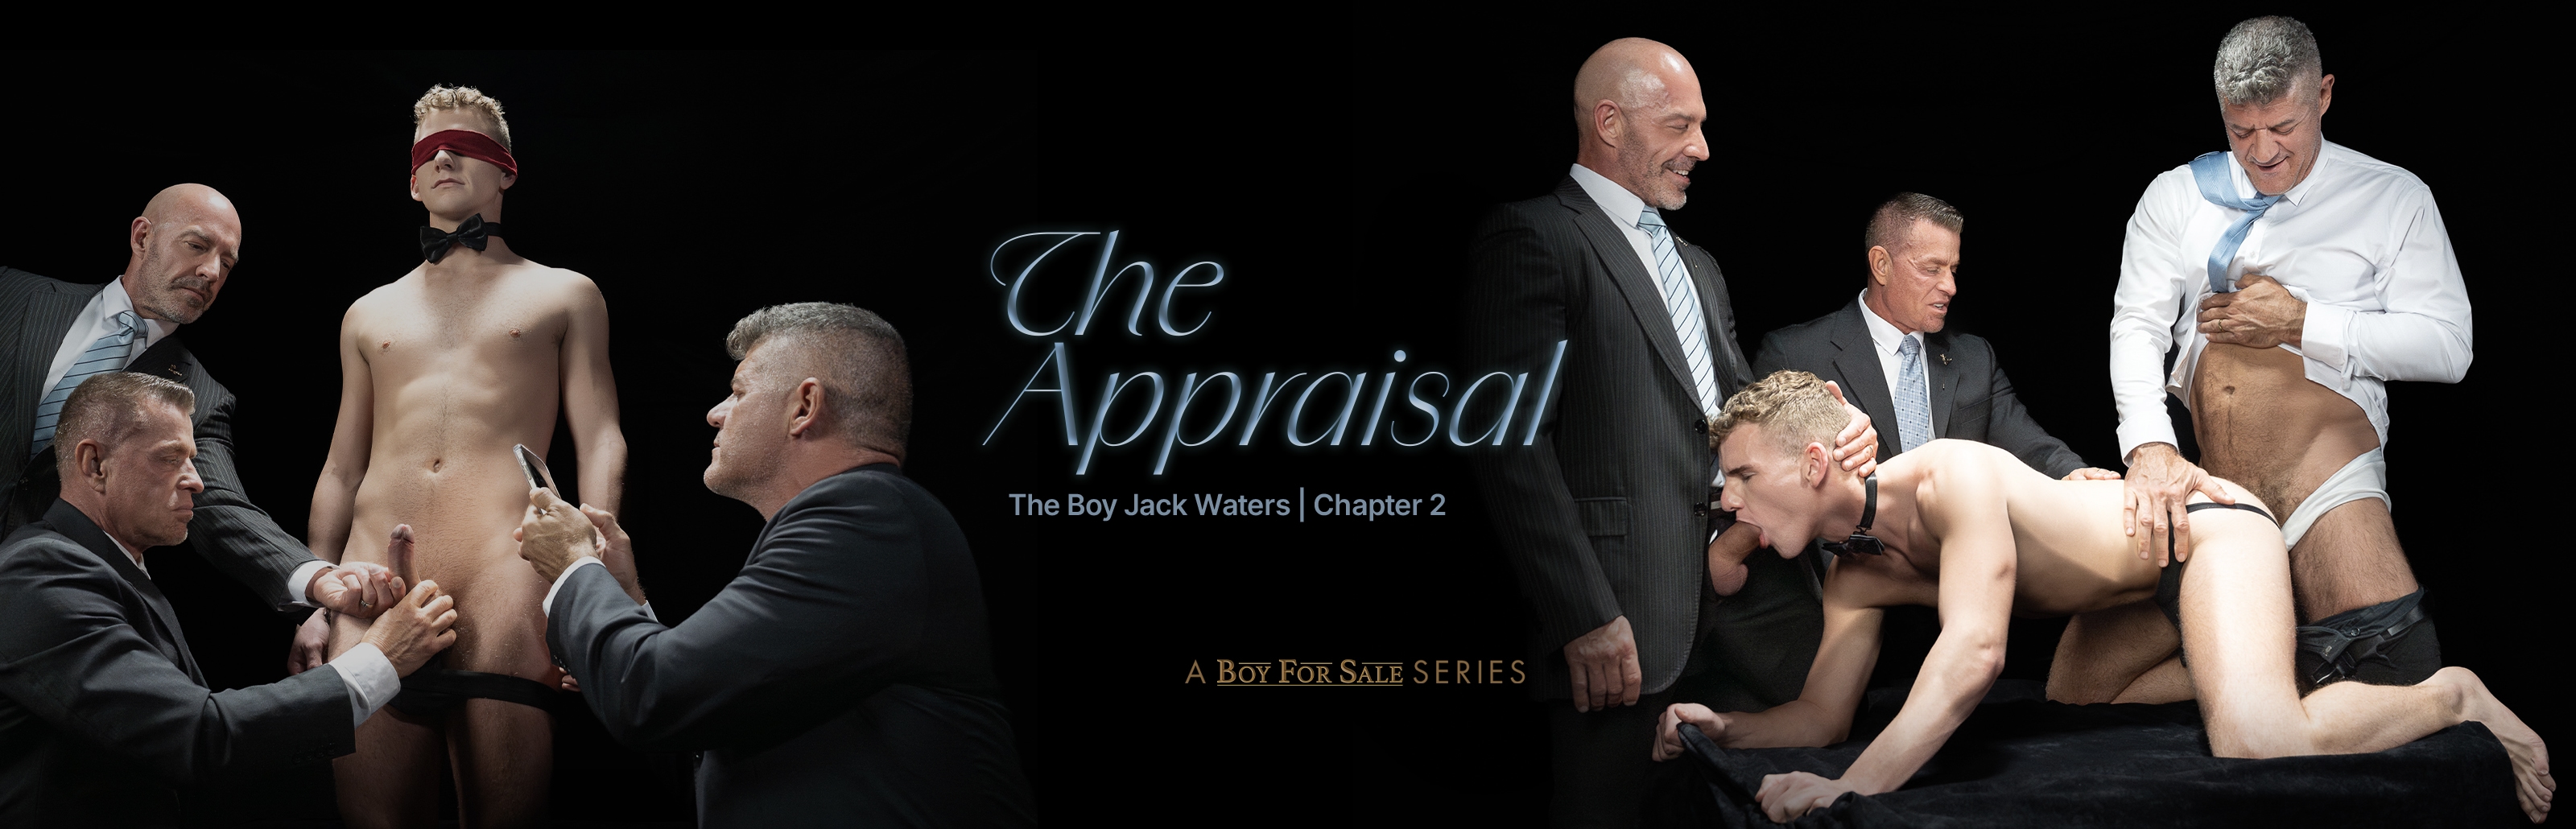 The Appraisal | THE BOY JACK WATERS | Chapter 2 Photos 97